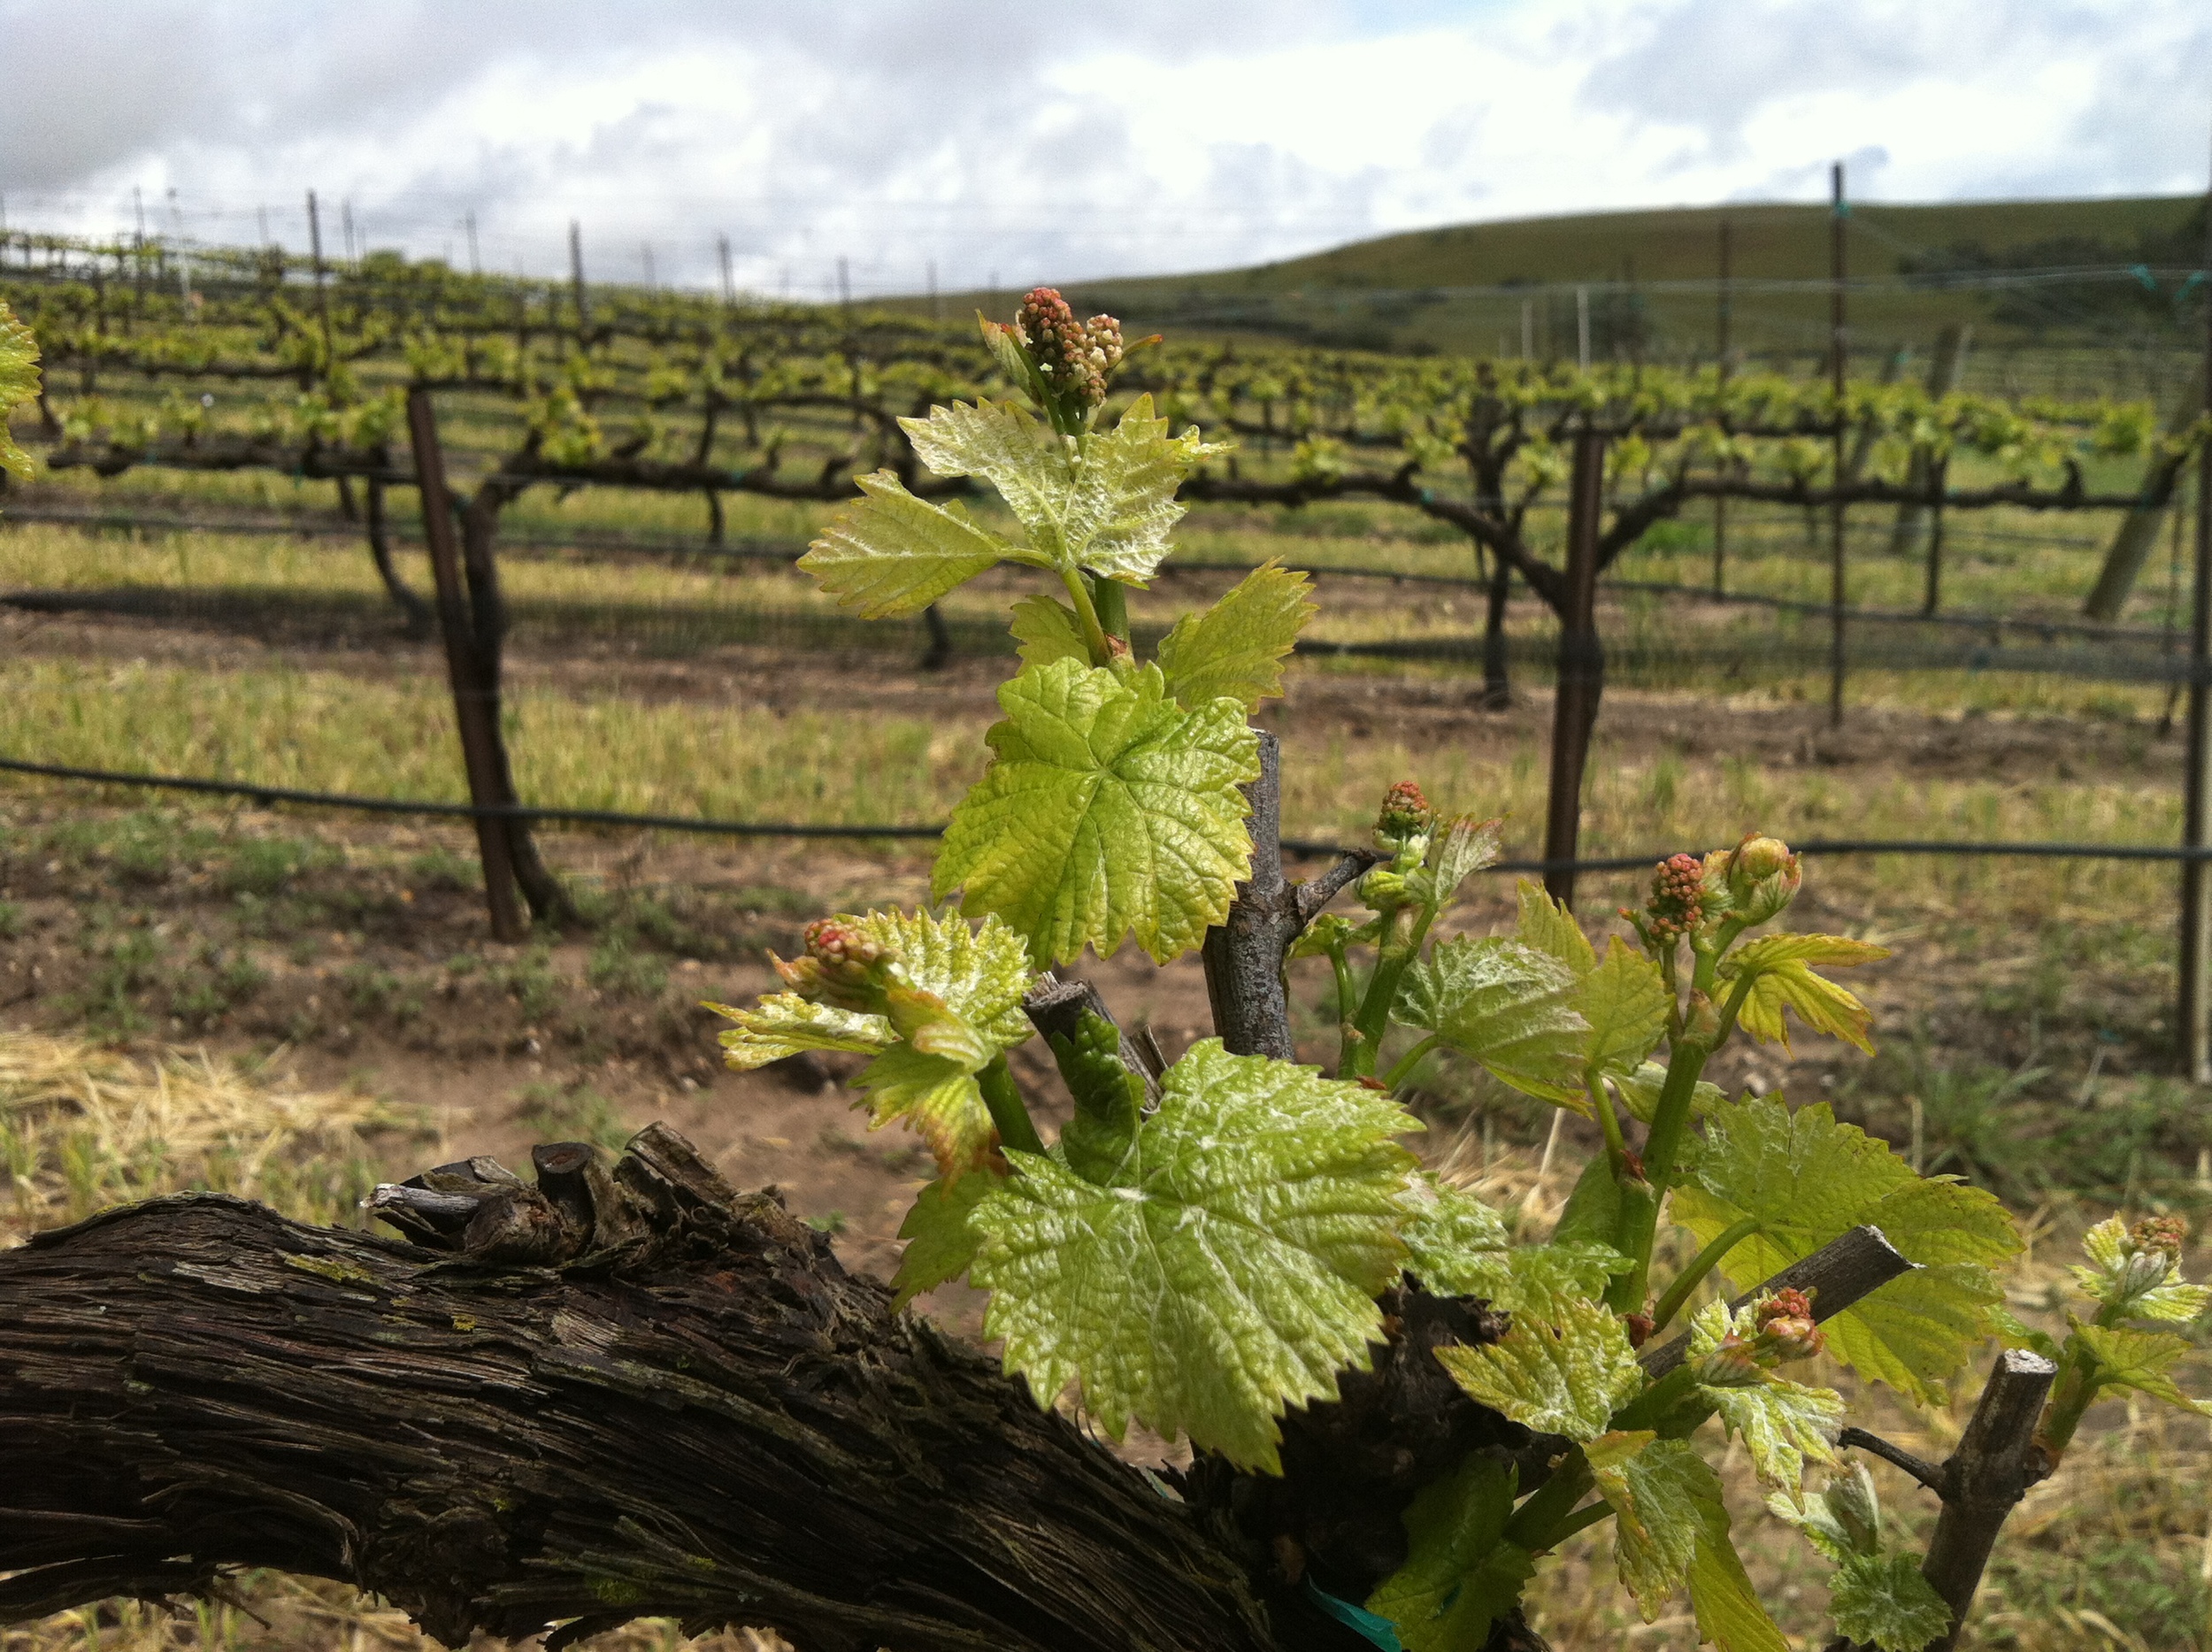 Riesling vine sprouting new leaves